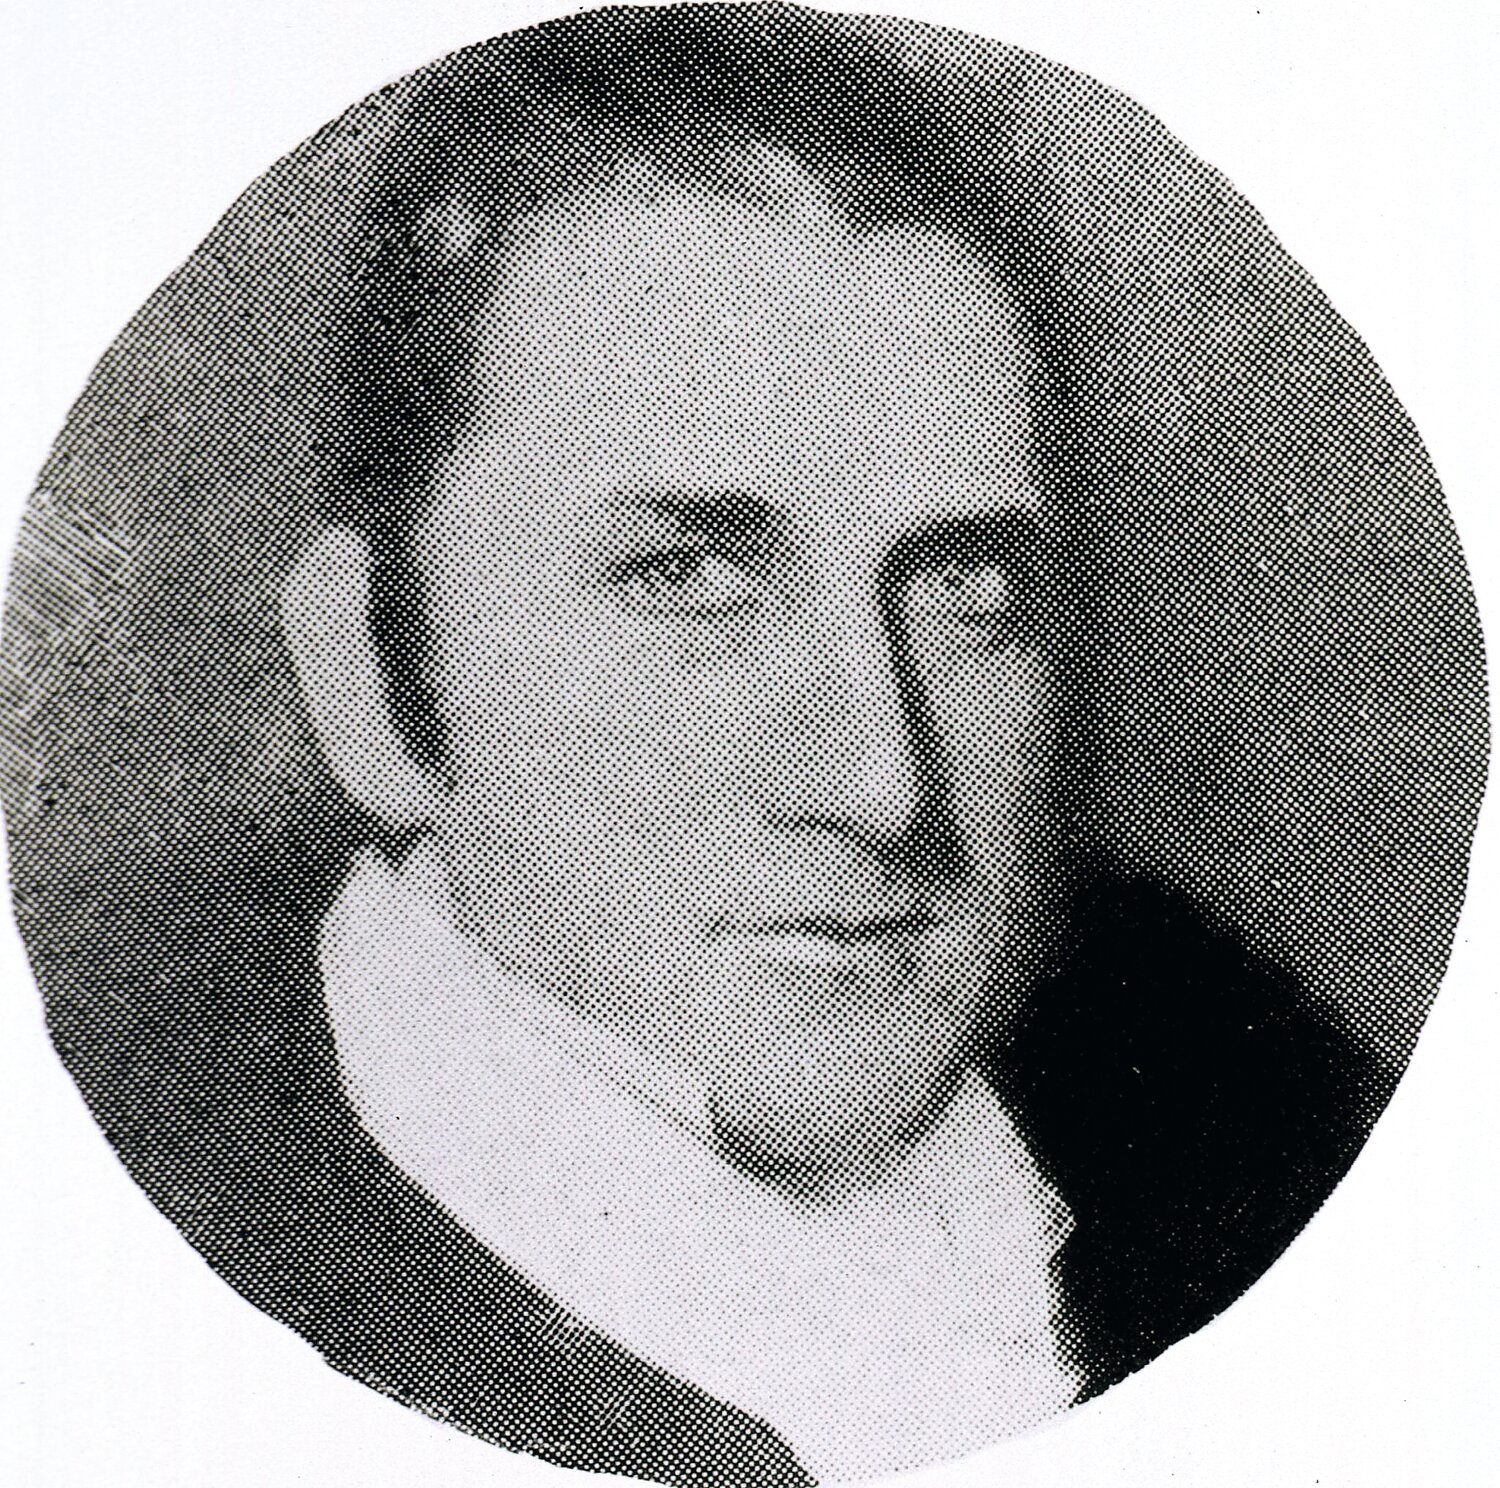 The good Dr. Thomas Sewall arrived in Essex as a young, Harvard-educated physician and married into one of Chebacco's “first families” when he married Mary Choate.